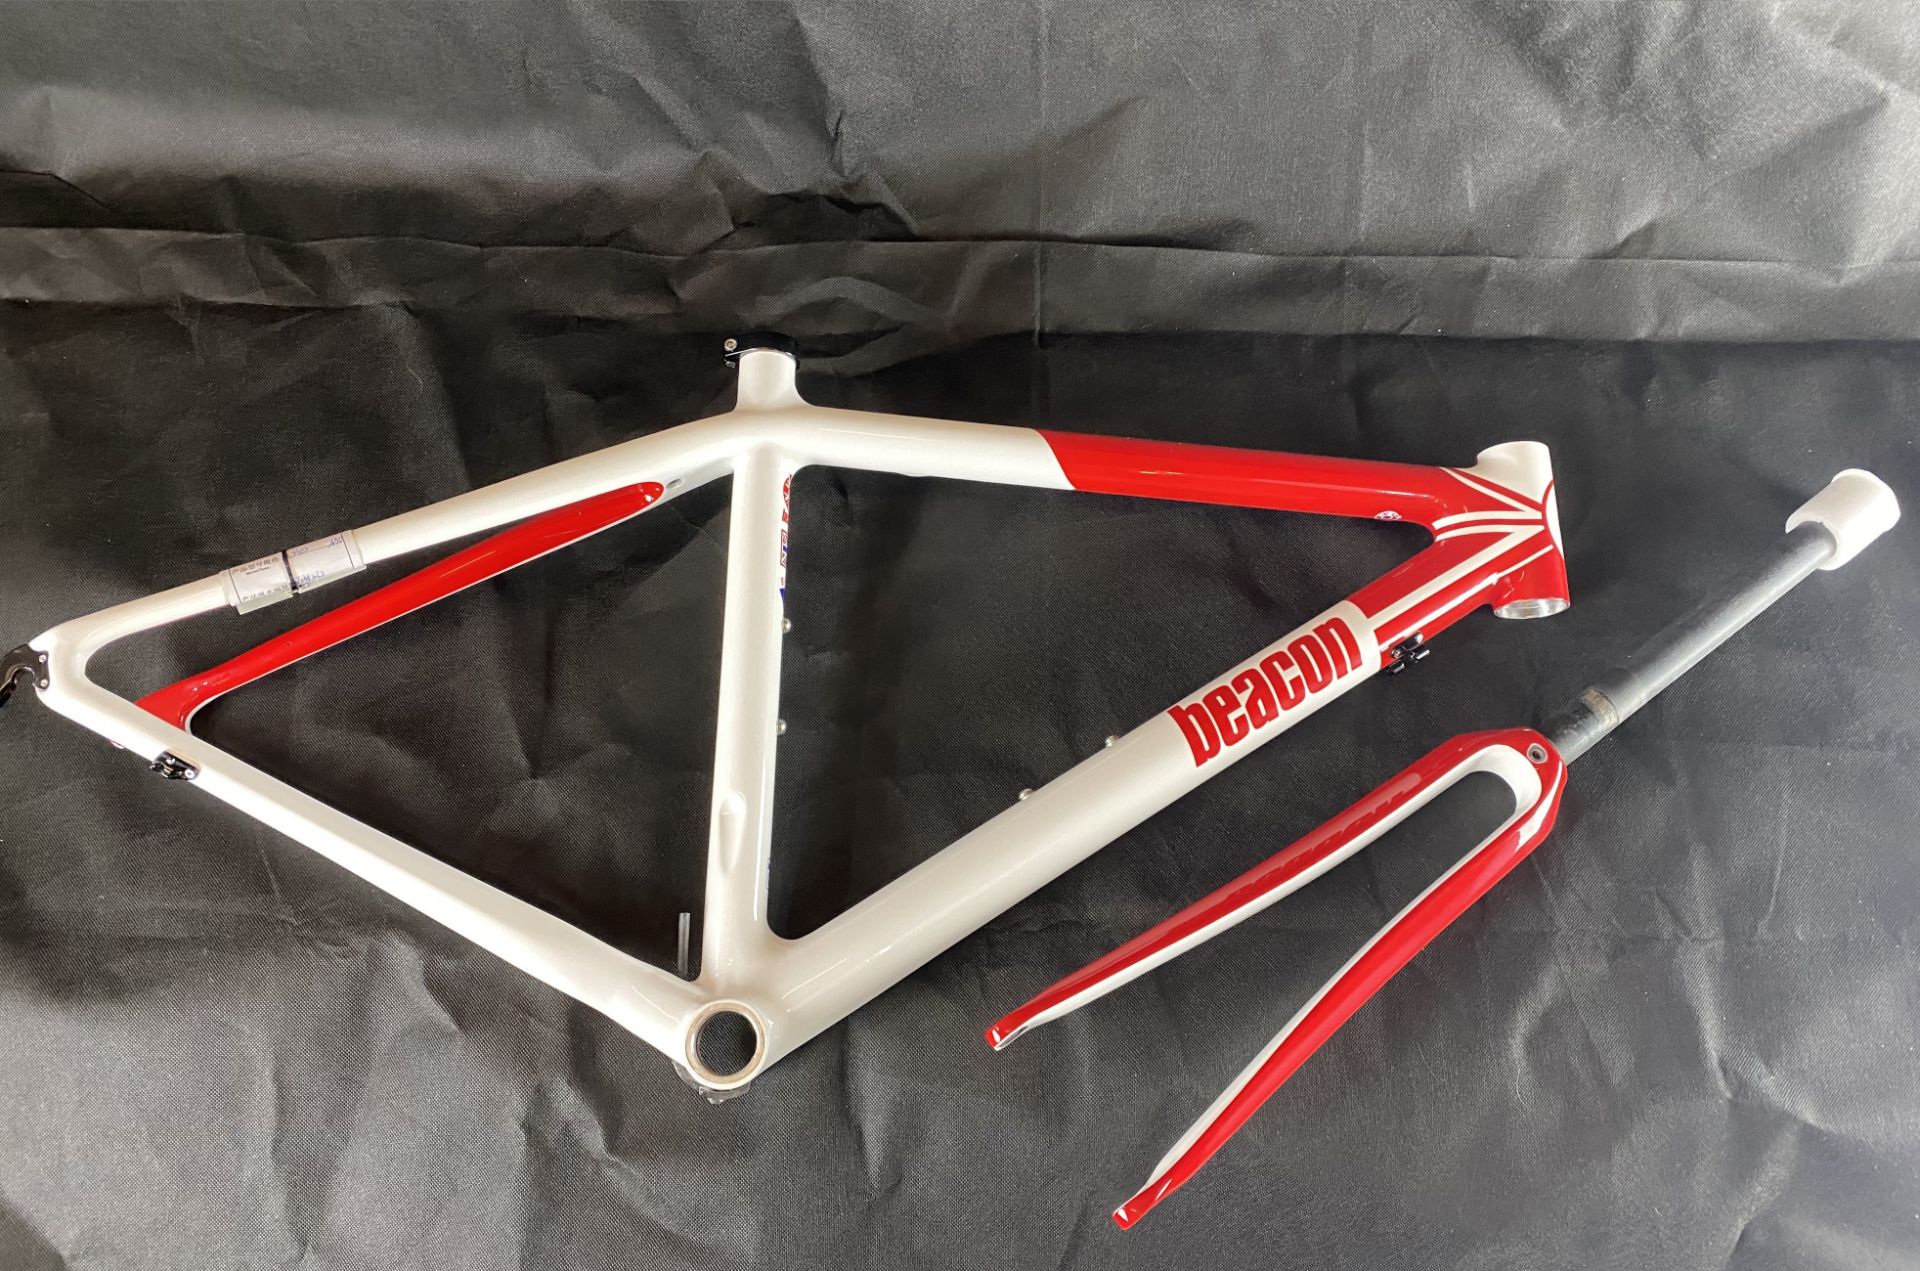 1 x Beacon Model BF-60, Size Small, Carbon Fibre Bike Frame in White & Red .